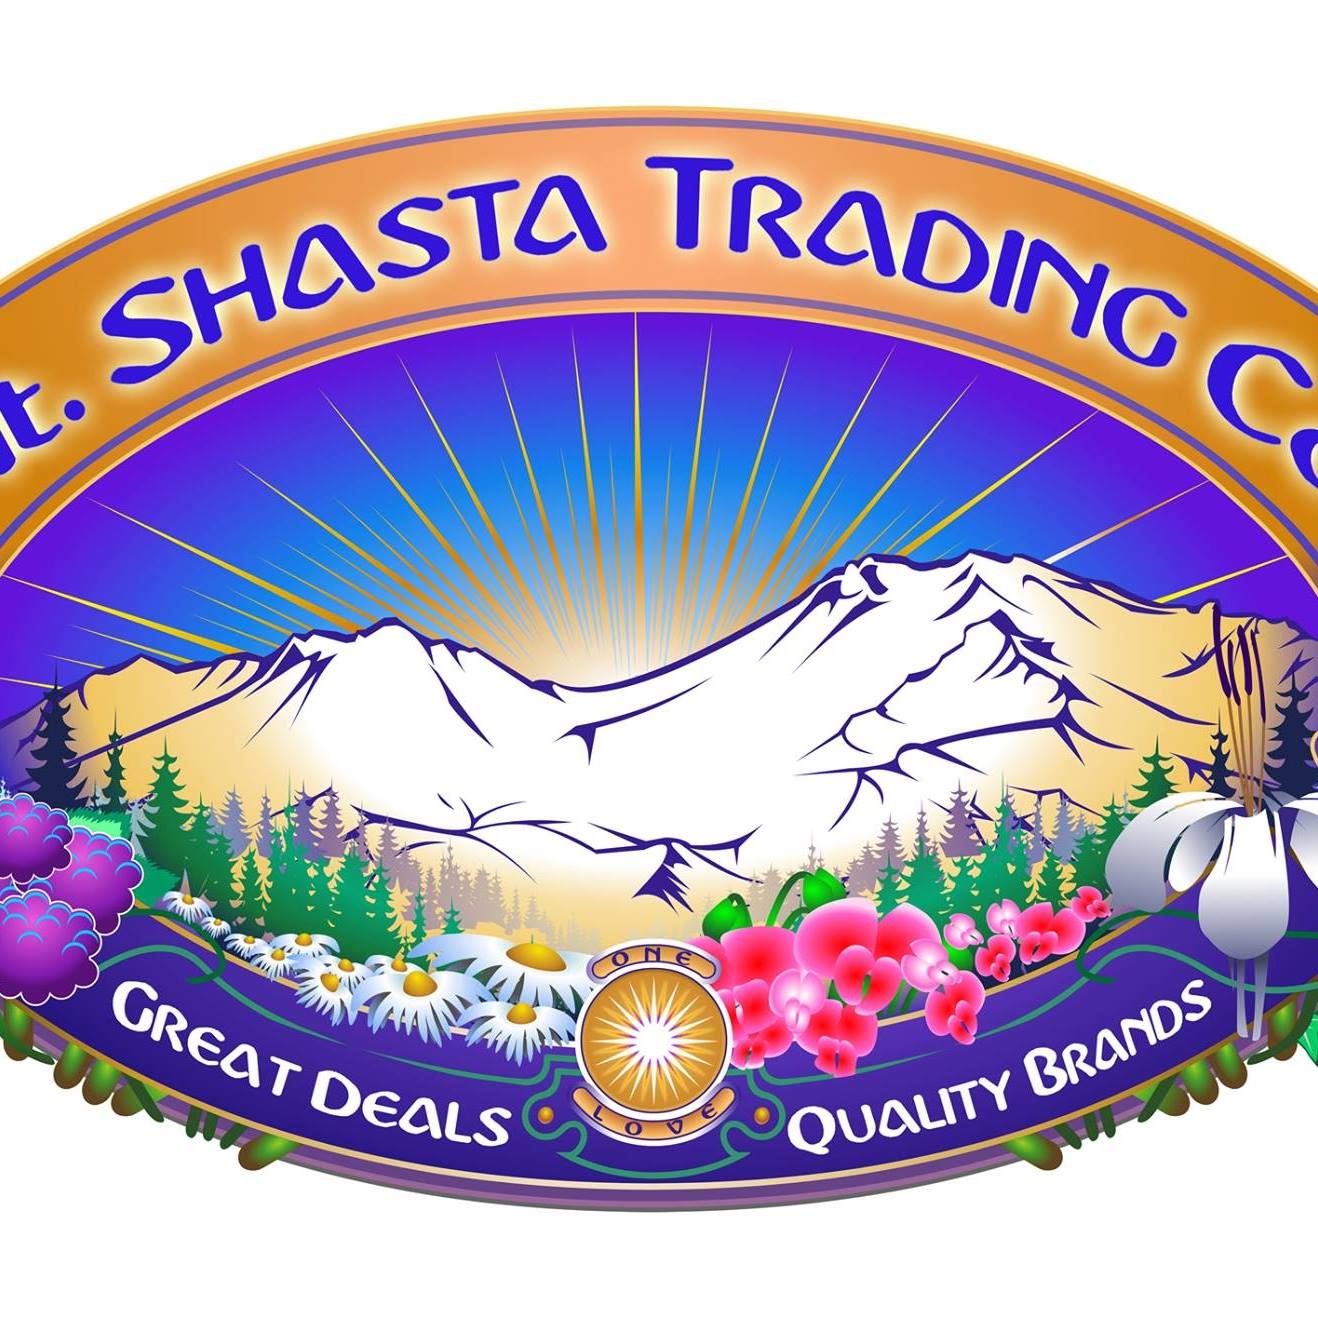 Mount Shasta Trading CO - Great Deals on Quality Brands